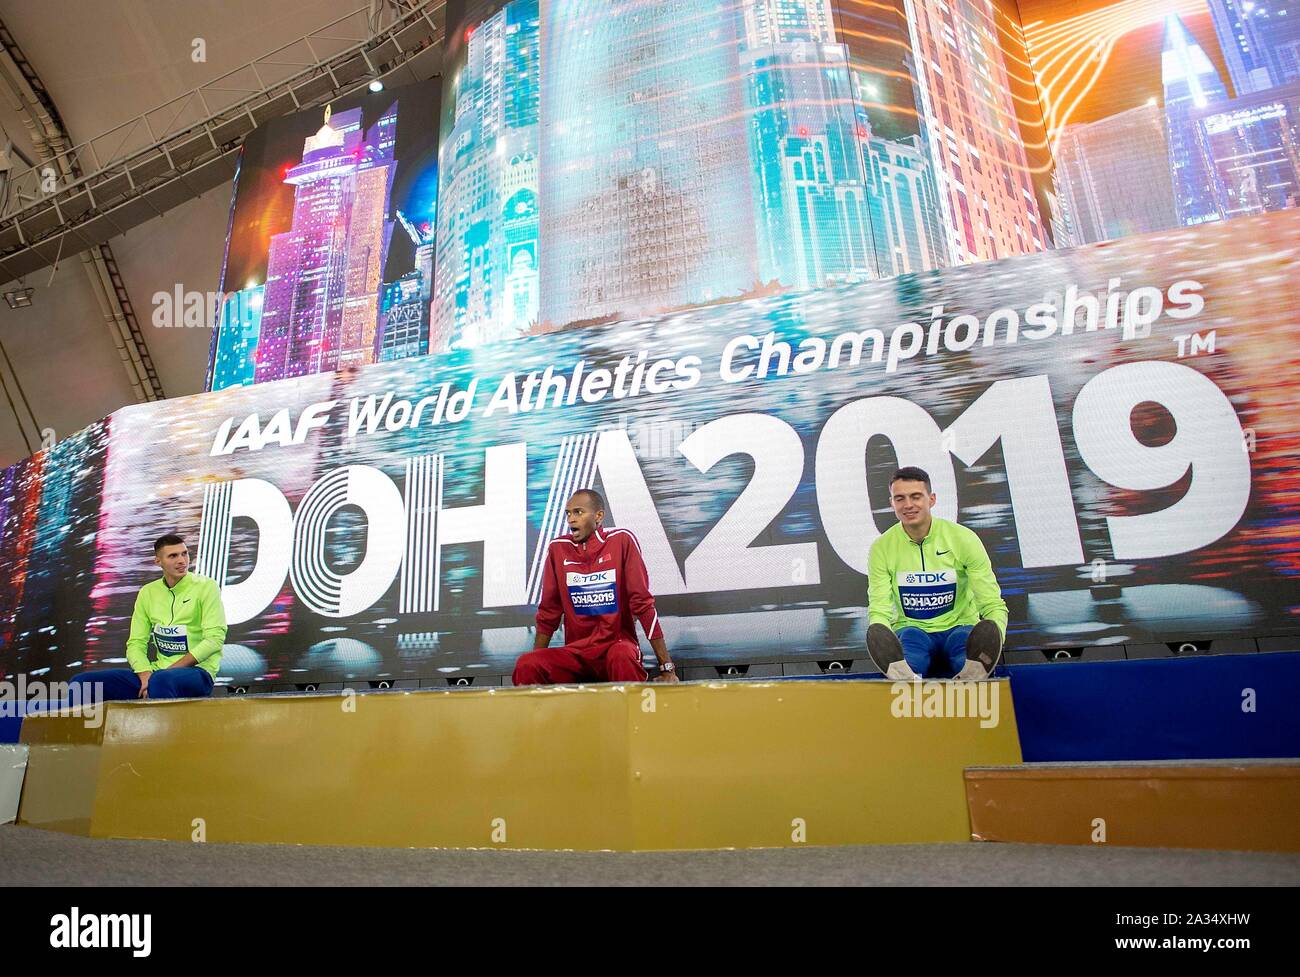 Doha, Qatar. 04th Oct, 2019. curious situation in the victory relay, the athletes are waiting on the stage, then the honor is canceled, vr Ilya Ivanyuk (ANA/RUS/3rd place), winner Mutaz Essa BARSHIM (QAT/1st place), Mikhail Akimenko (ANA/RUS/2nd place), award ceremony high jump of the men, on 04.10.2019 World Championships 2019 in Doha/Qatar, from 27.09. - 10.10.2019. | Usage worldwide Credit: dpa/Alamy Live News Stock Photo